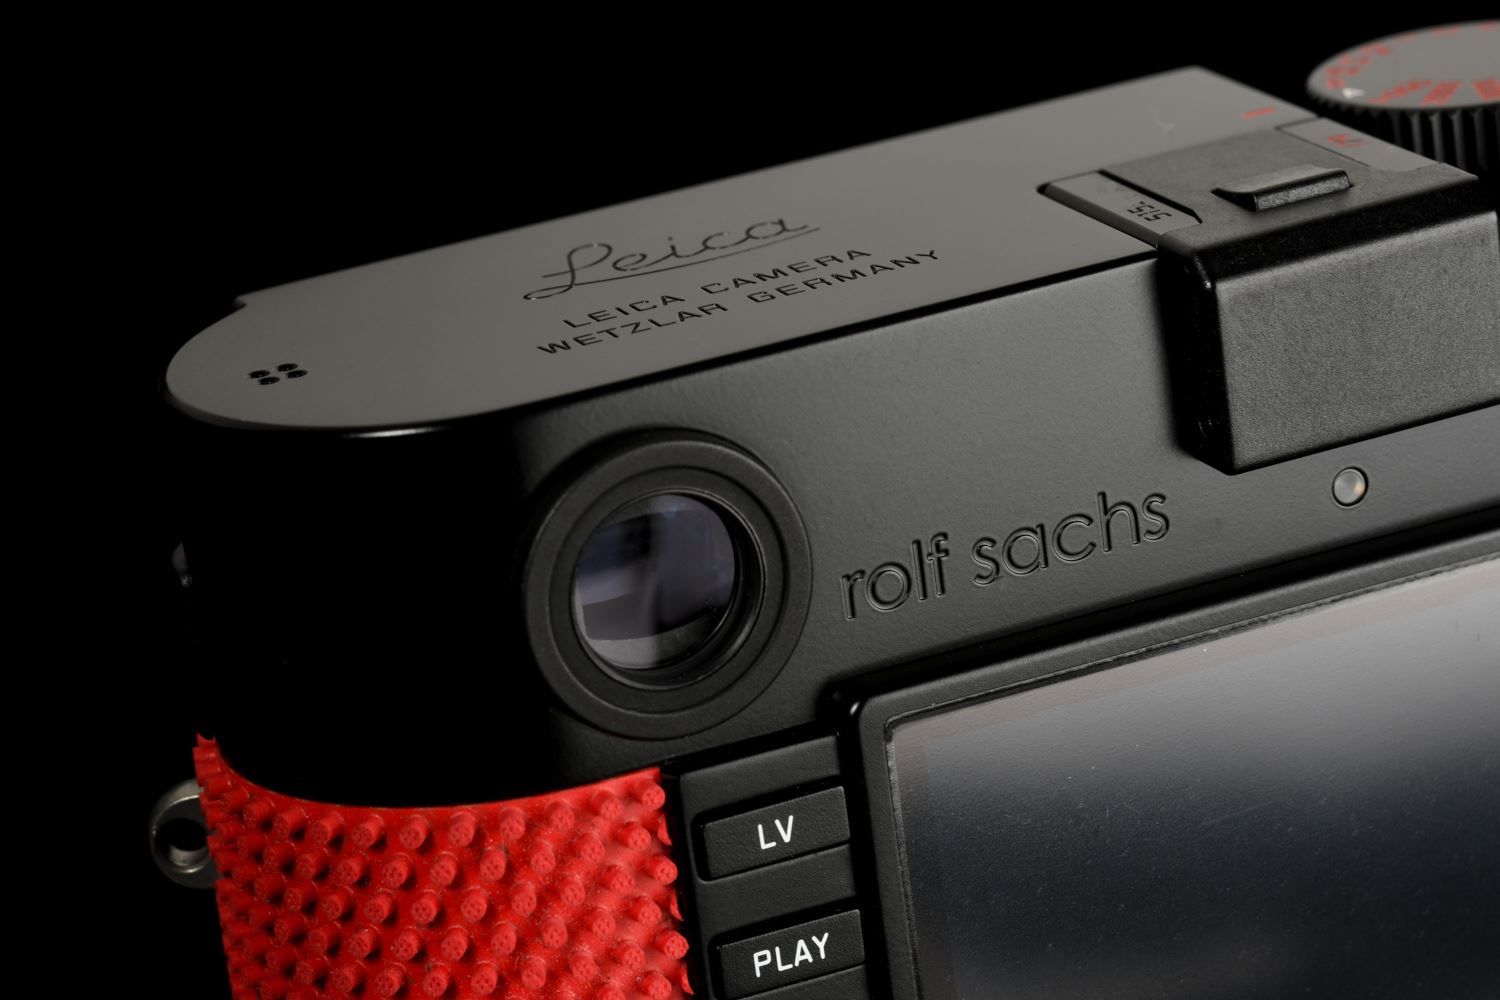 Picture of Leica M-P "Grip" Edition by Rolf Sachs